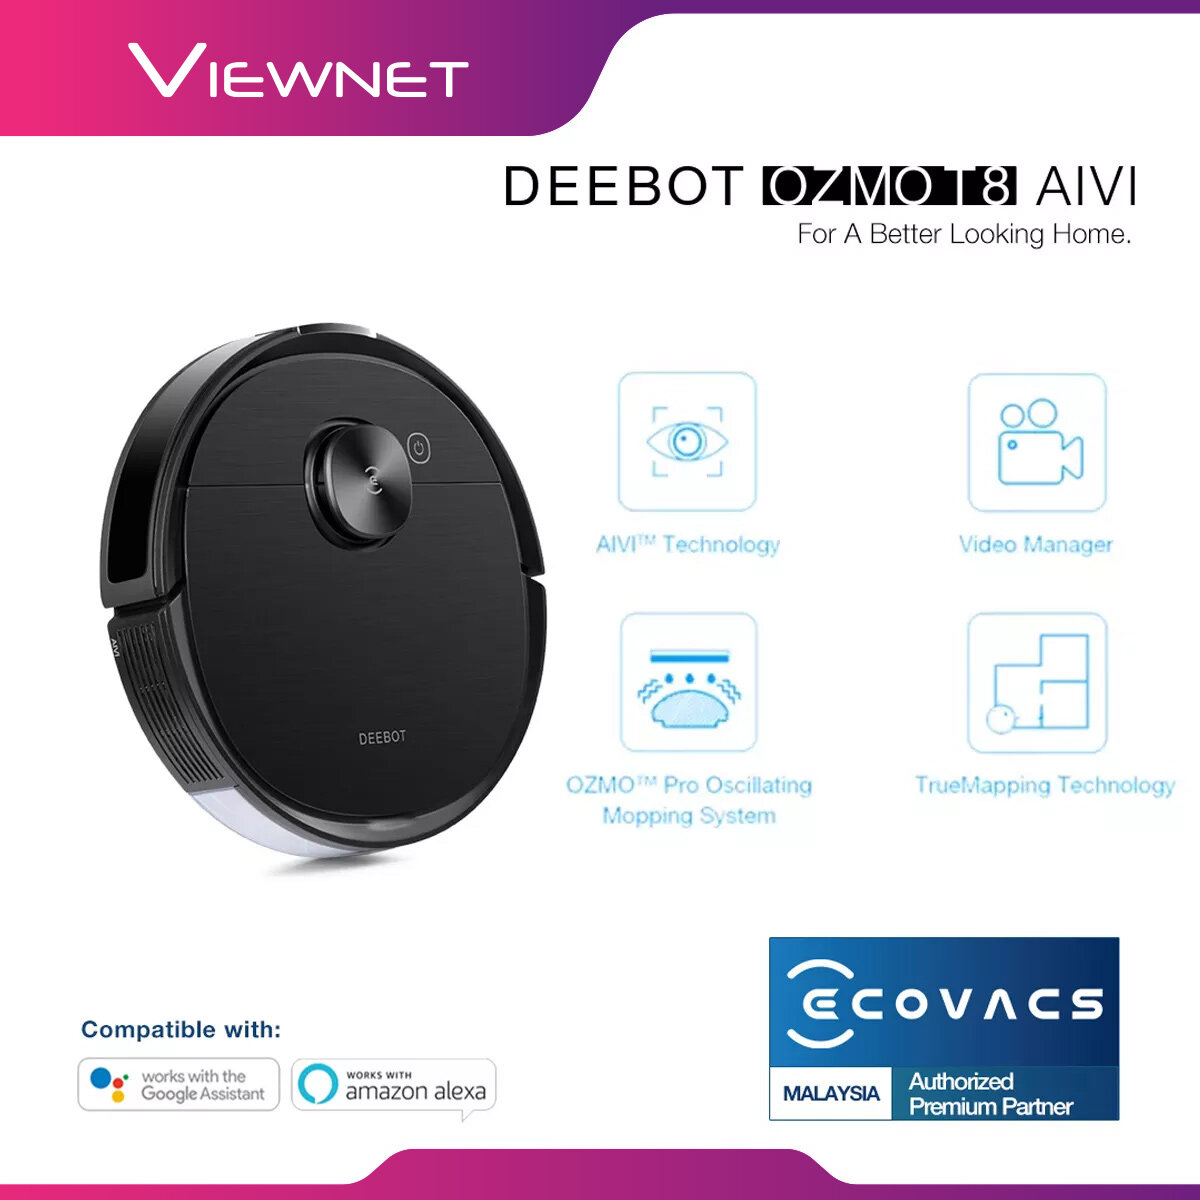 ECOVACS DEEBOT OZMO T8AIVI Robot Vacuum Cleaner withã€Upgraded AIVItm Technology&OZMO Pro Oscillating Moppingã€‘ Powered Electrical 480times/min, Intelligent Robotic Vacuum and Portable Cordless Handheld Vacuum[Local Shipping&I Year Waranty]